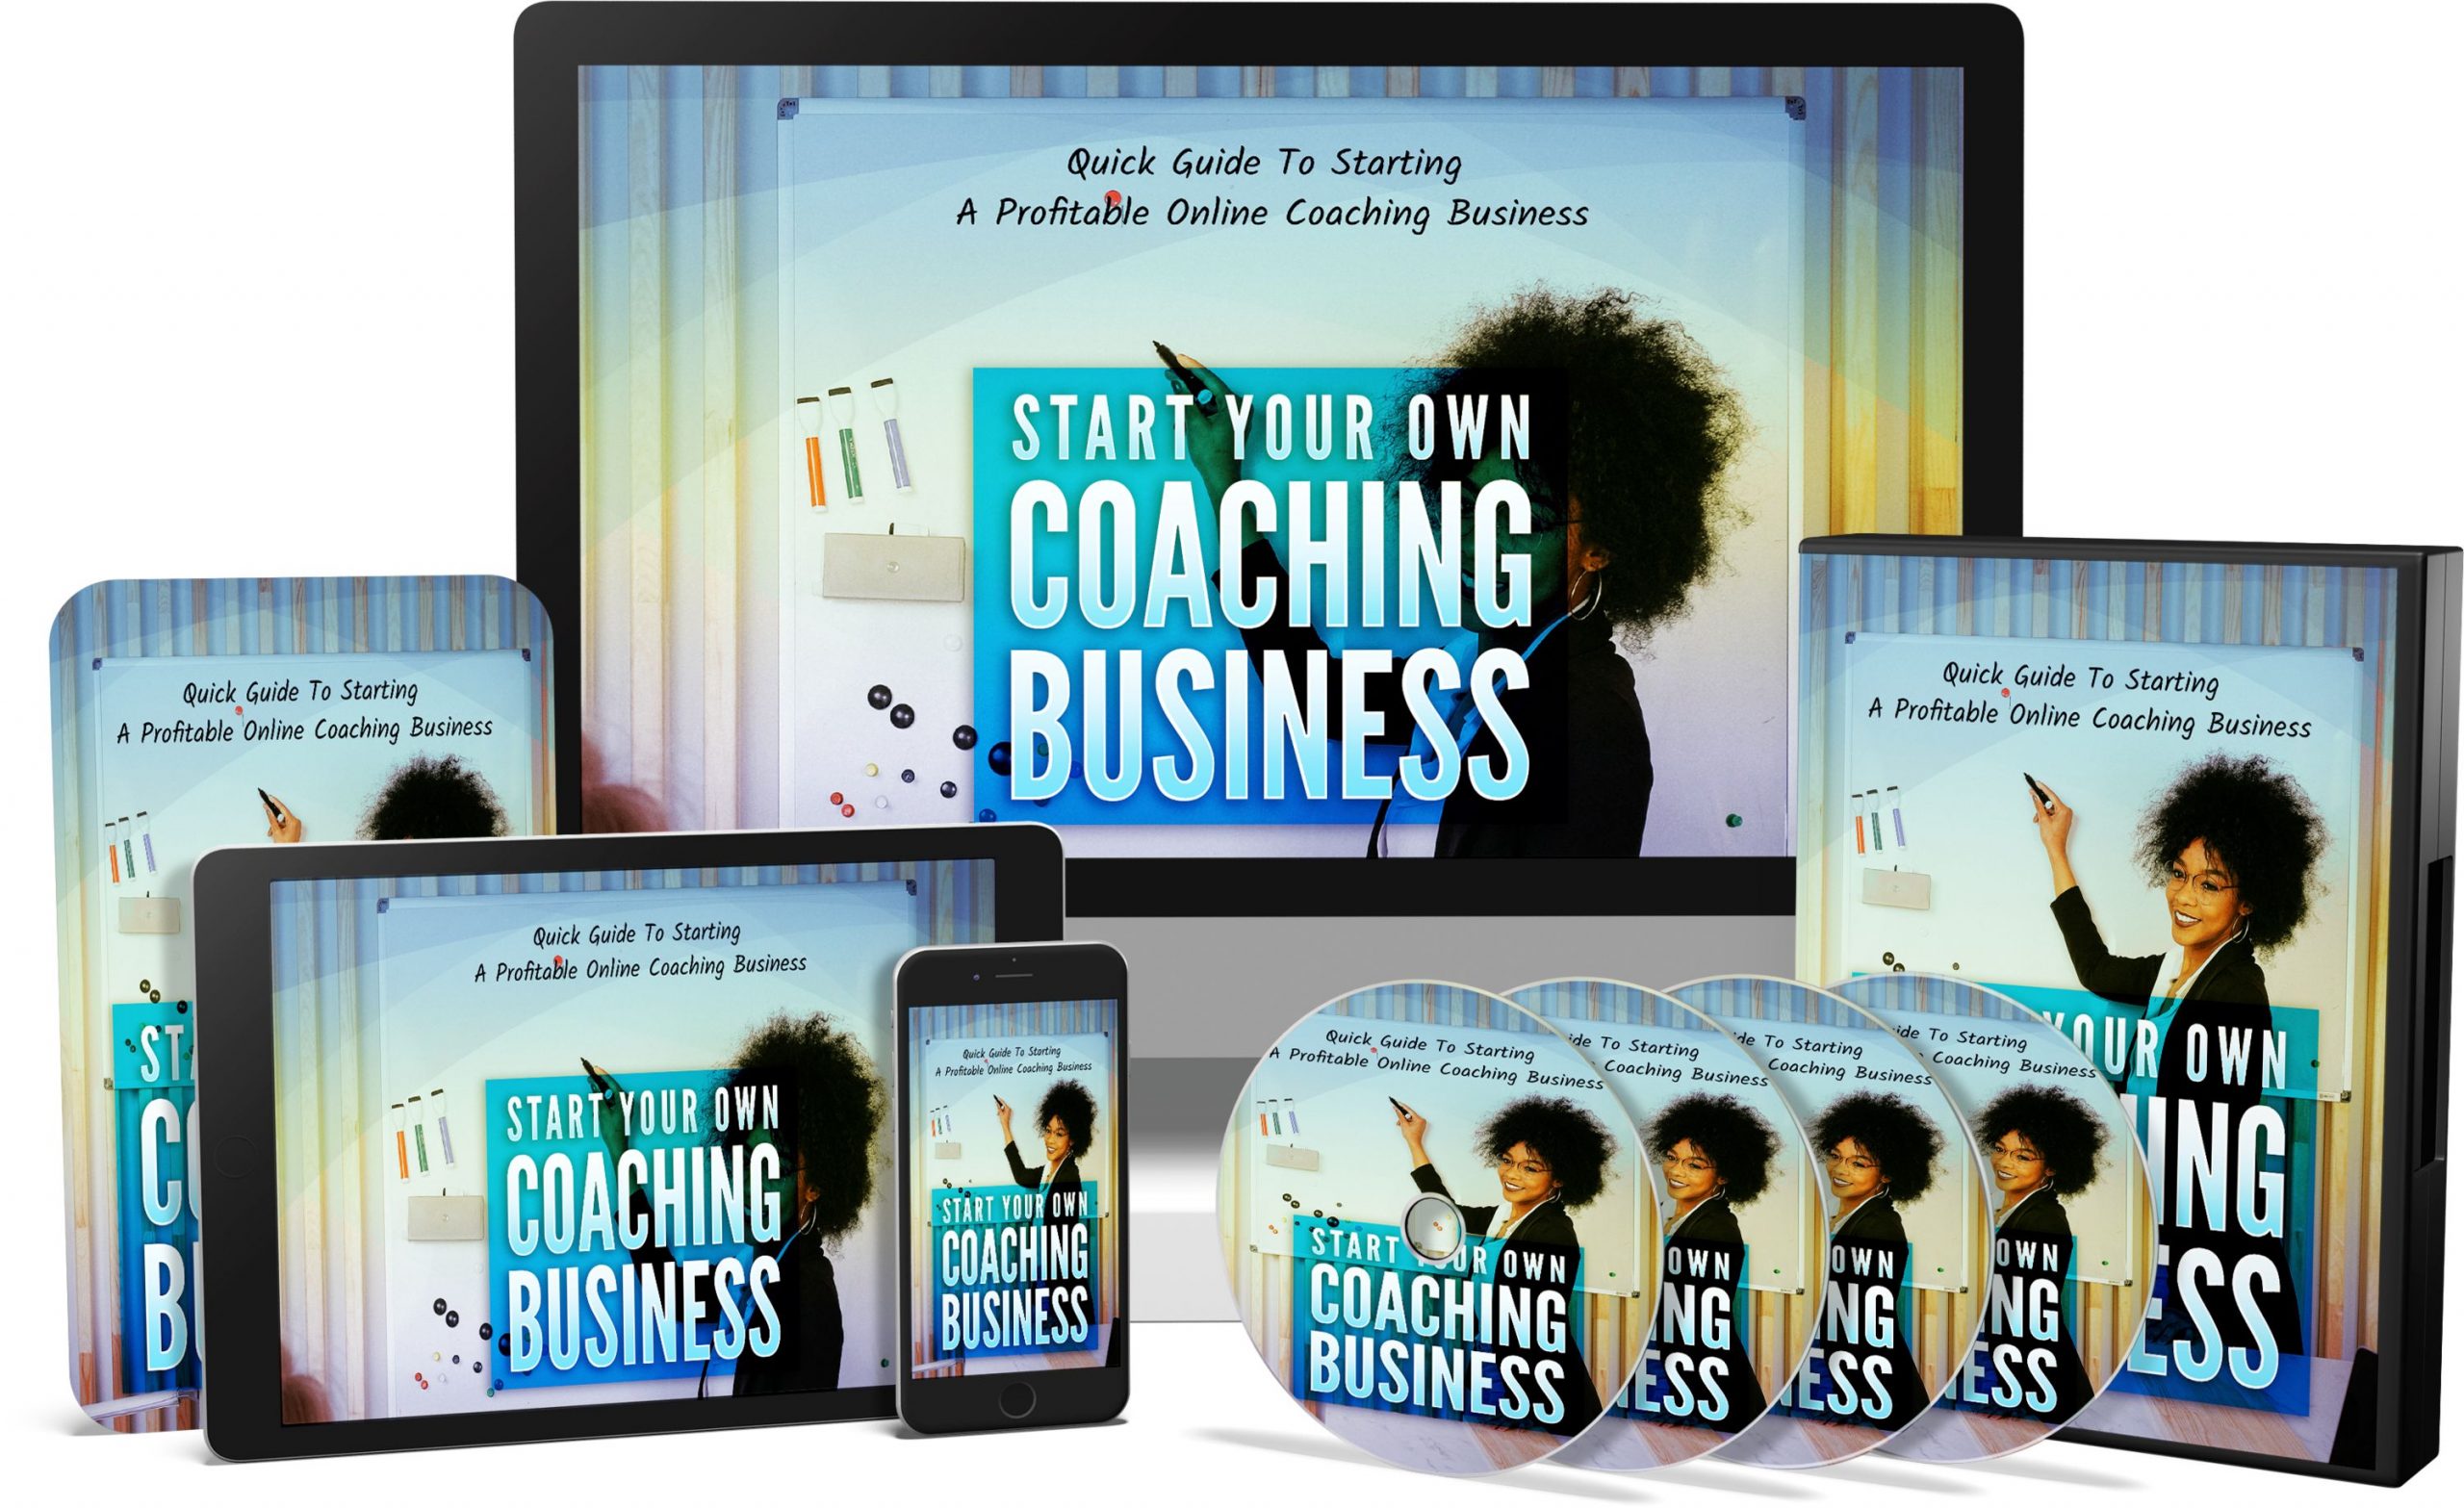 Start-Your-Own-Coaching-Business-PLR-Review